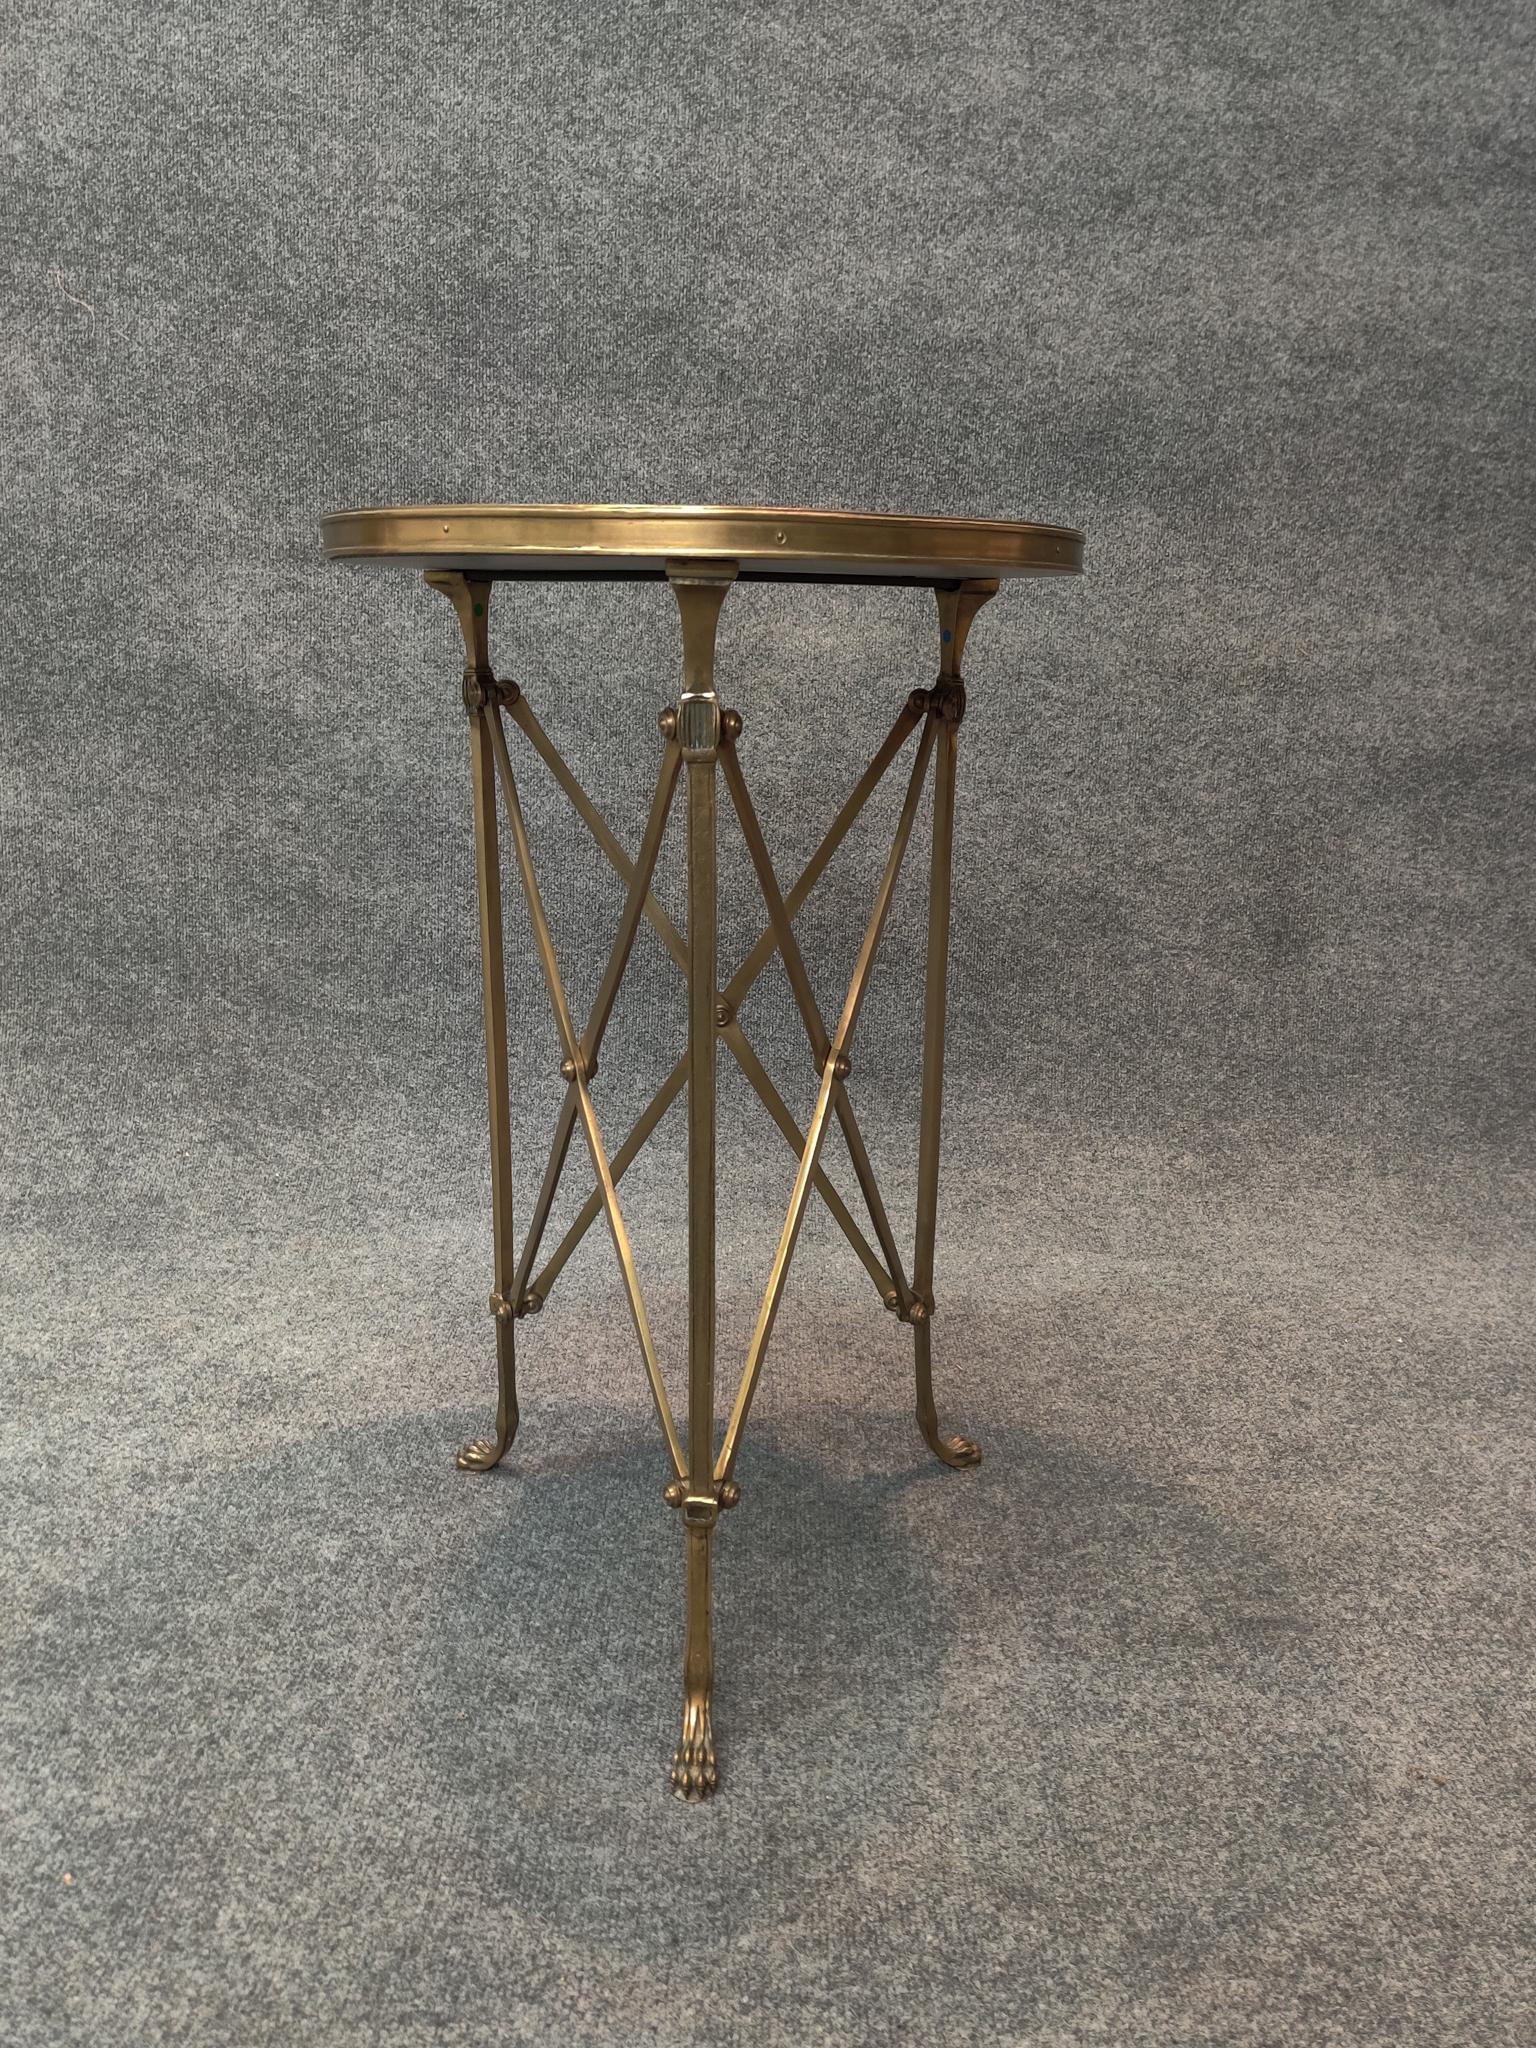 Mid-Century Modern Global Views Directoire Table Brass and Black Marble with White Veining